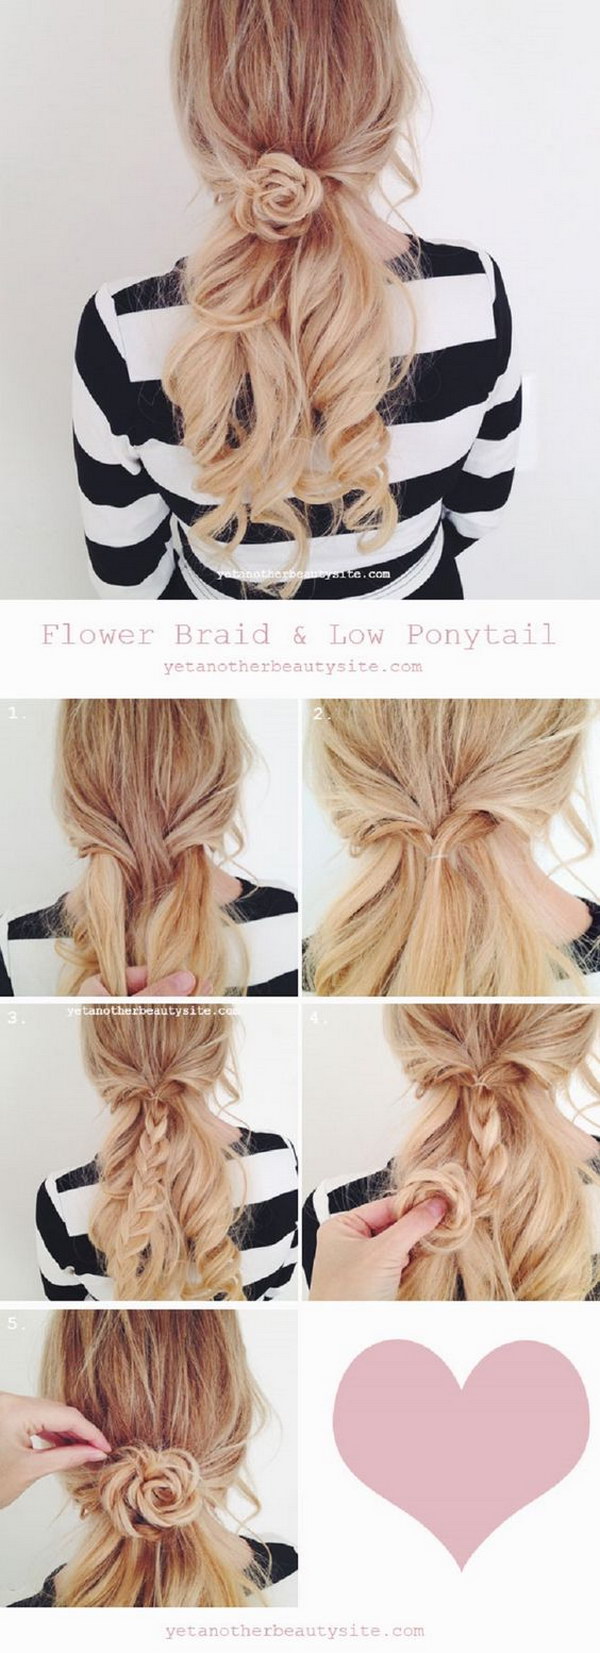 Romantic Low Ponytail and Flower Braid 